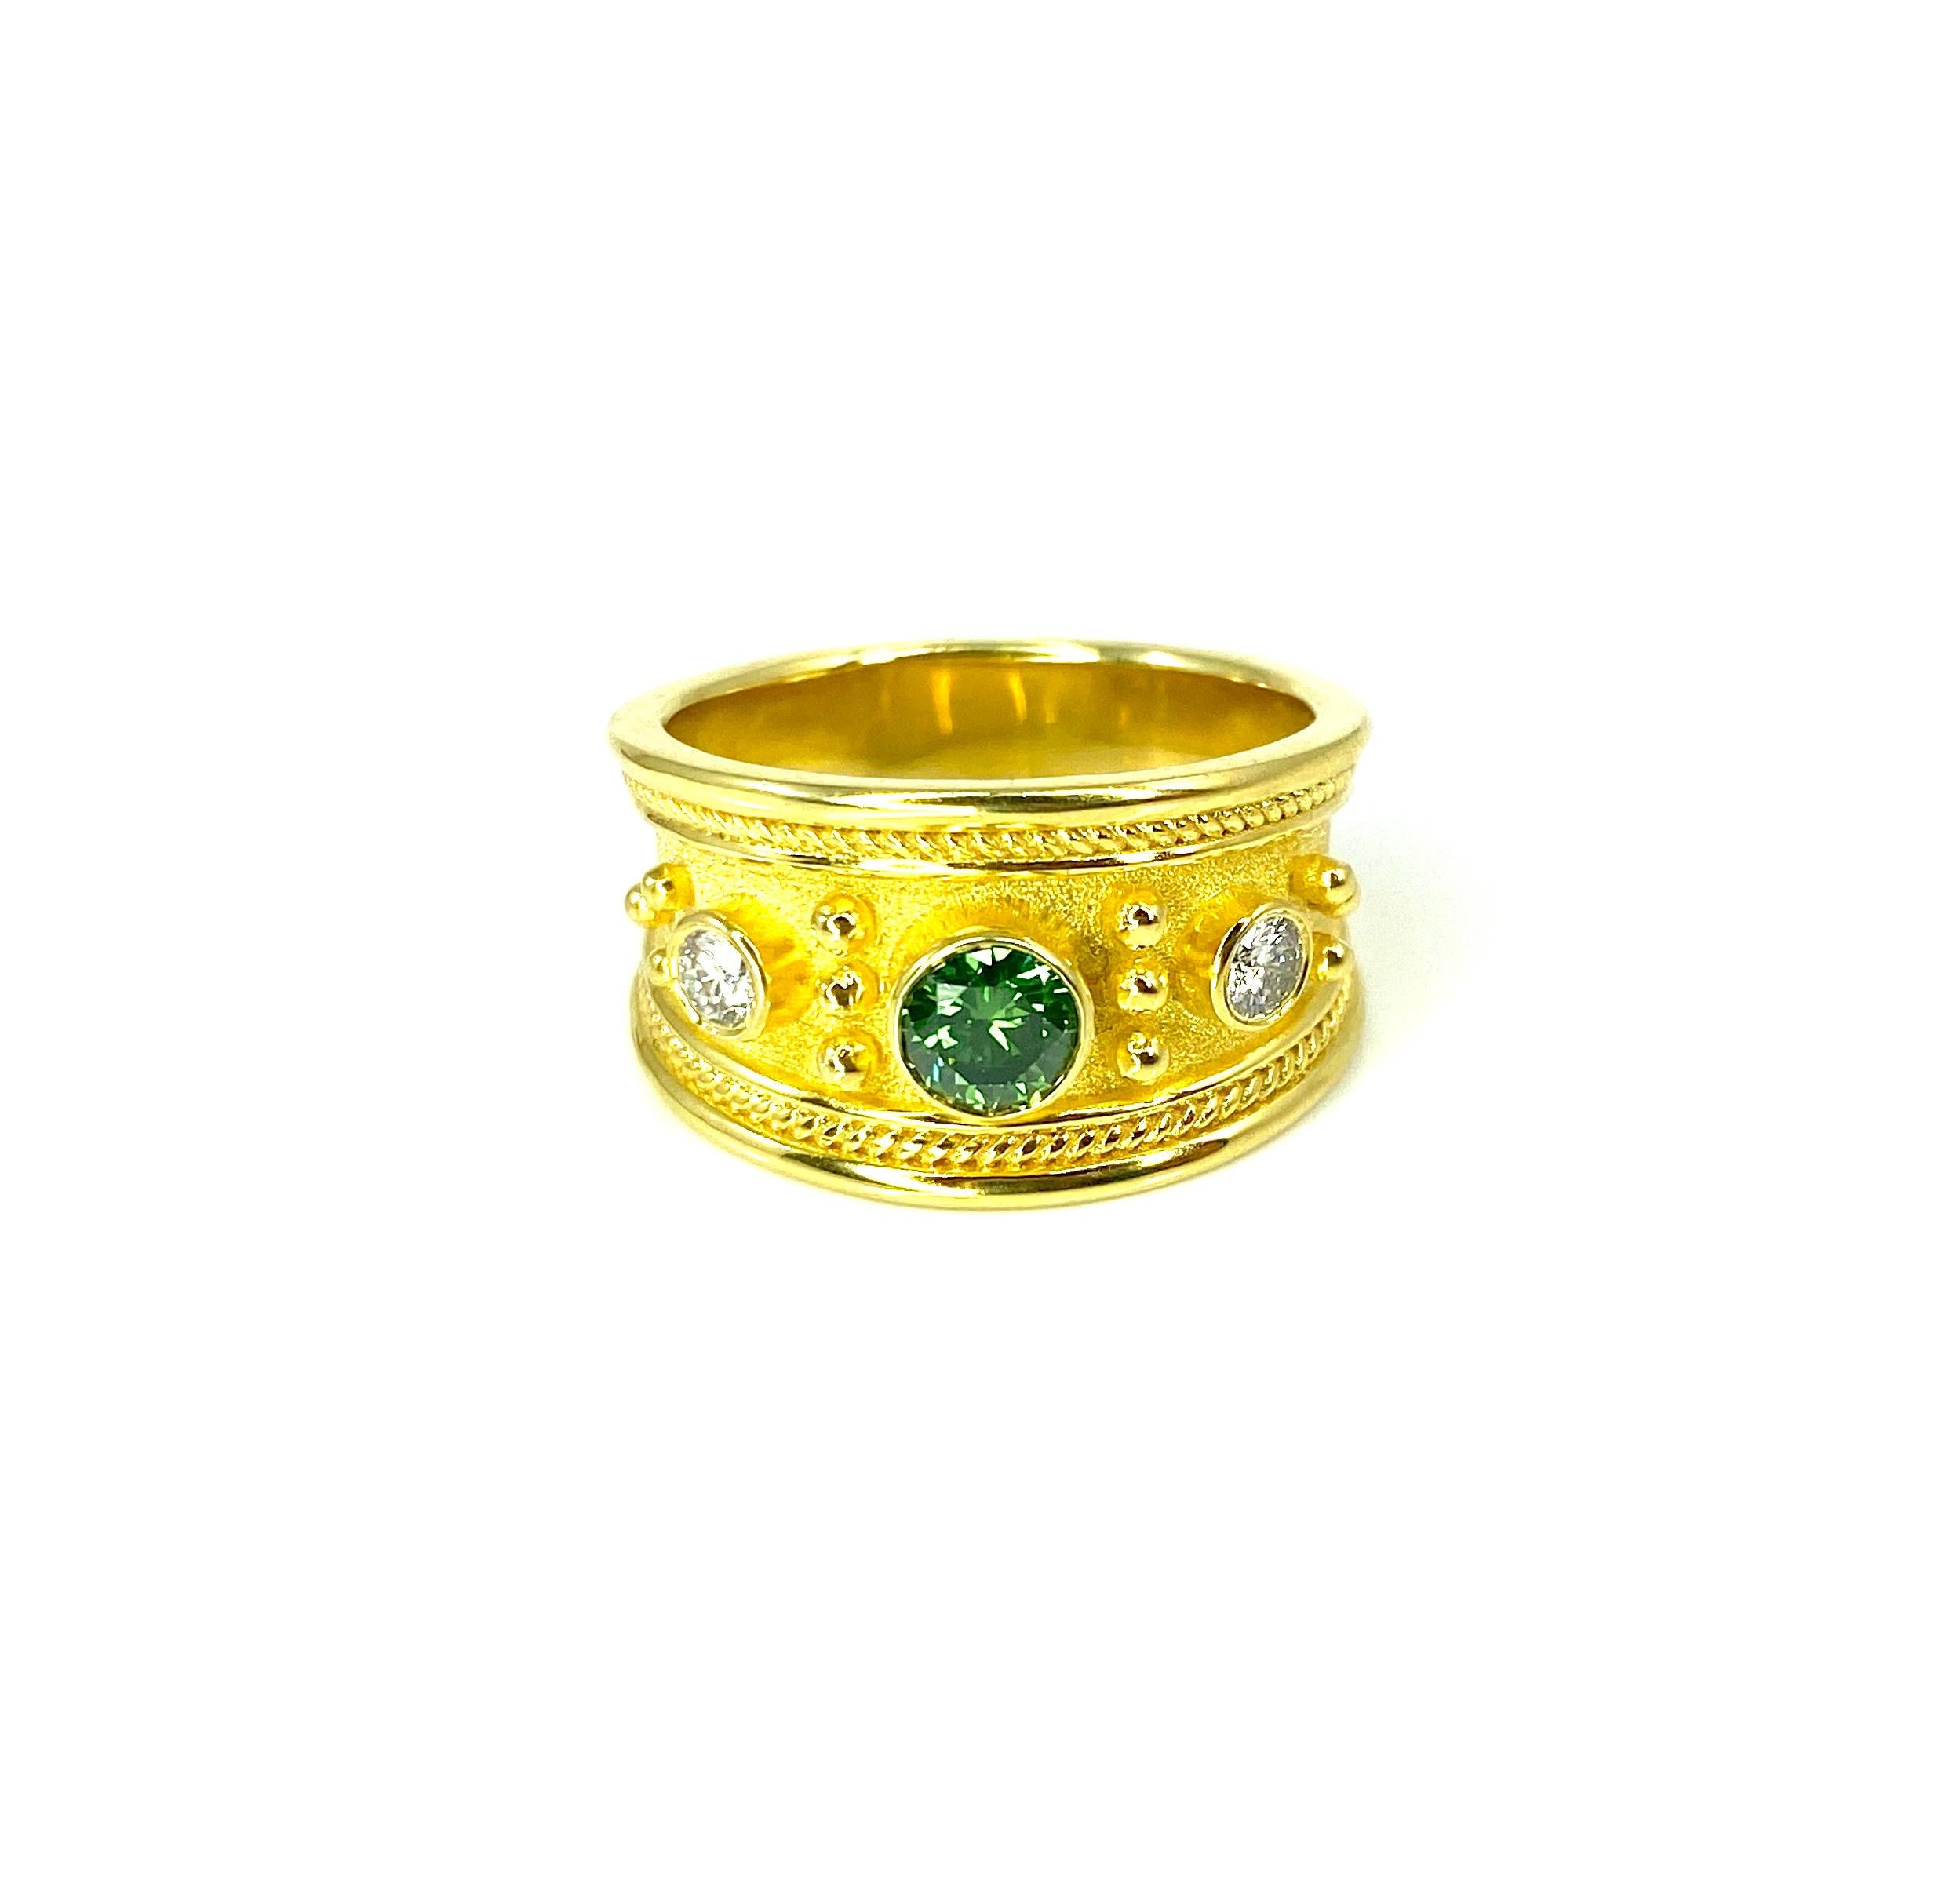 Georgios Collections presents S.Georgios designer graduated ring handmade from solid 18 Karat Yellow Gold. The ring is decorated under the microscope with 18 Karat yellow gold twisted wires and beads that shine on the Byzantine velvet background.